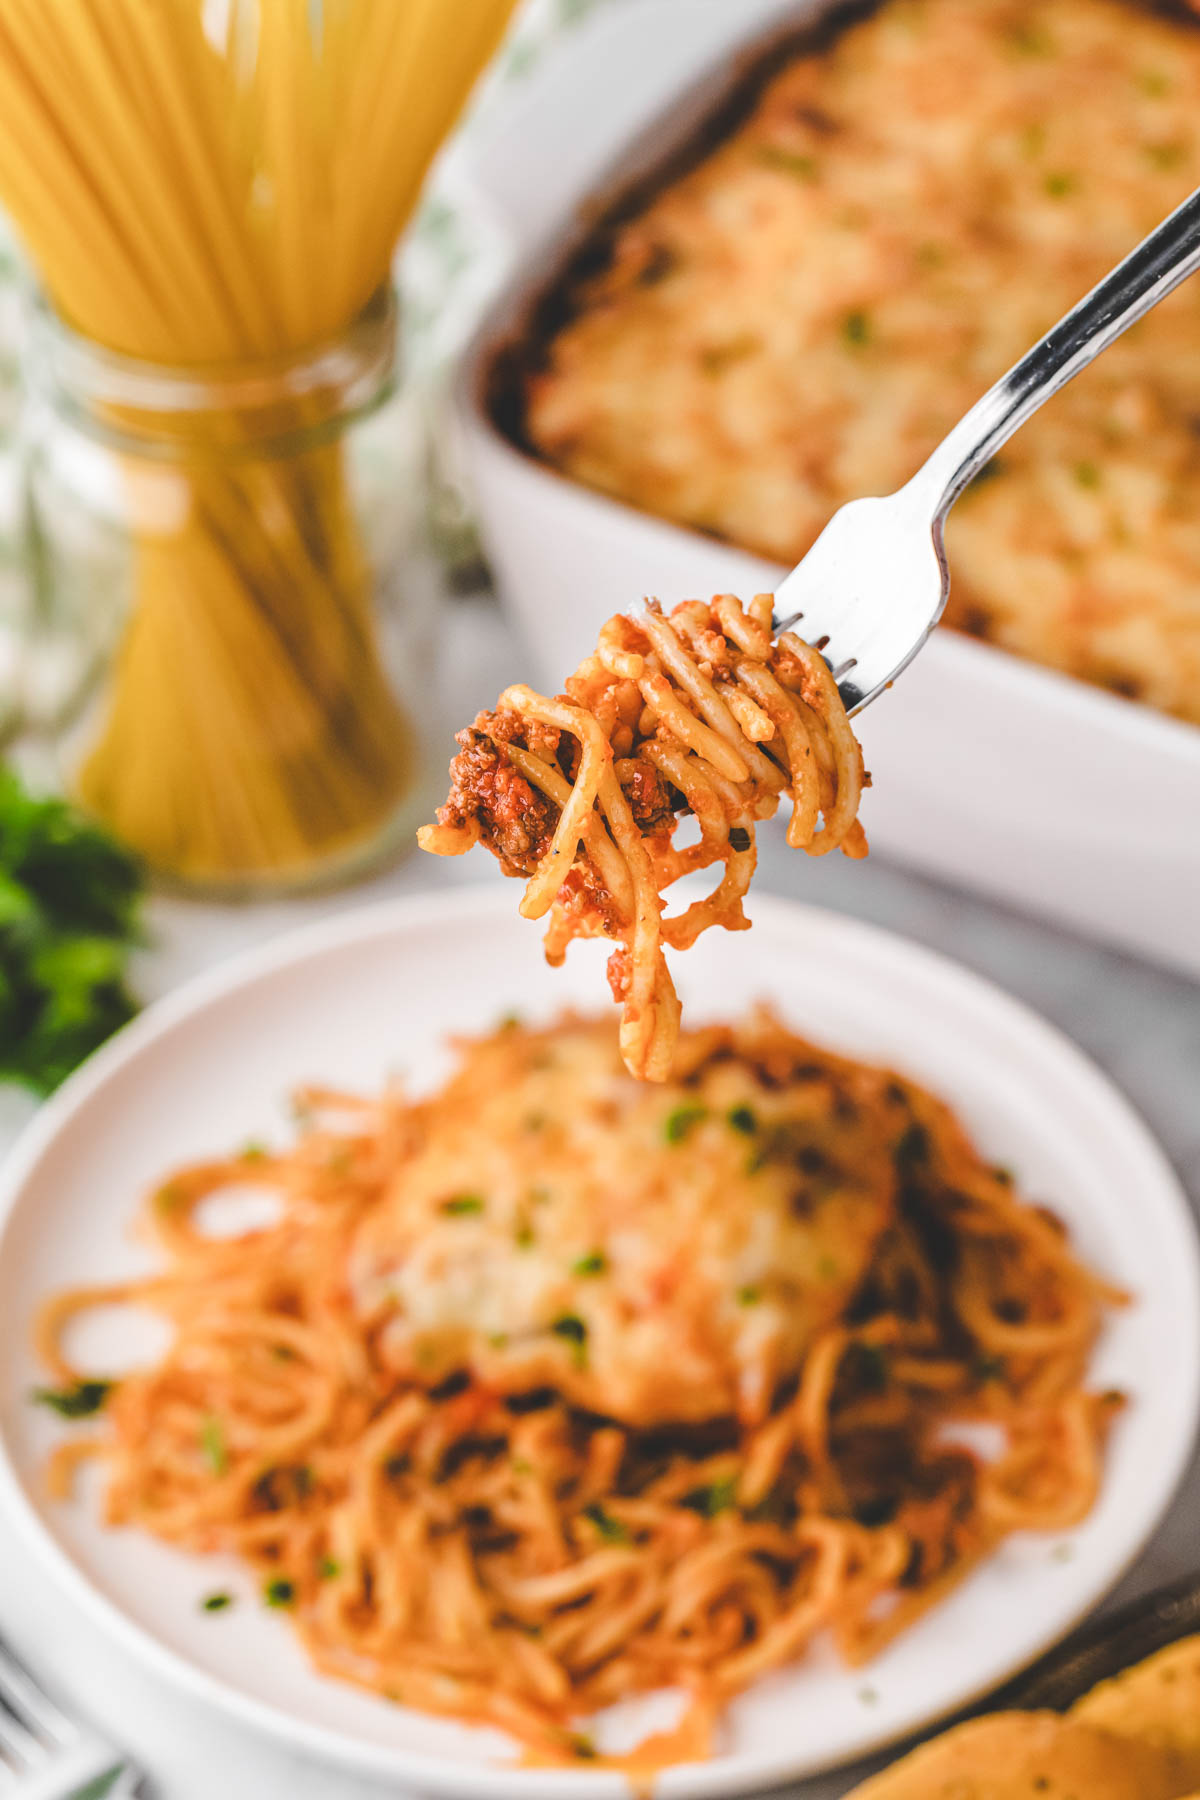 A fork filled with a bite of baked spaghetti.